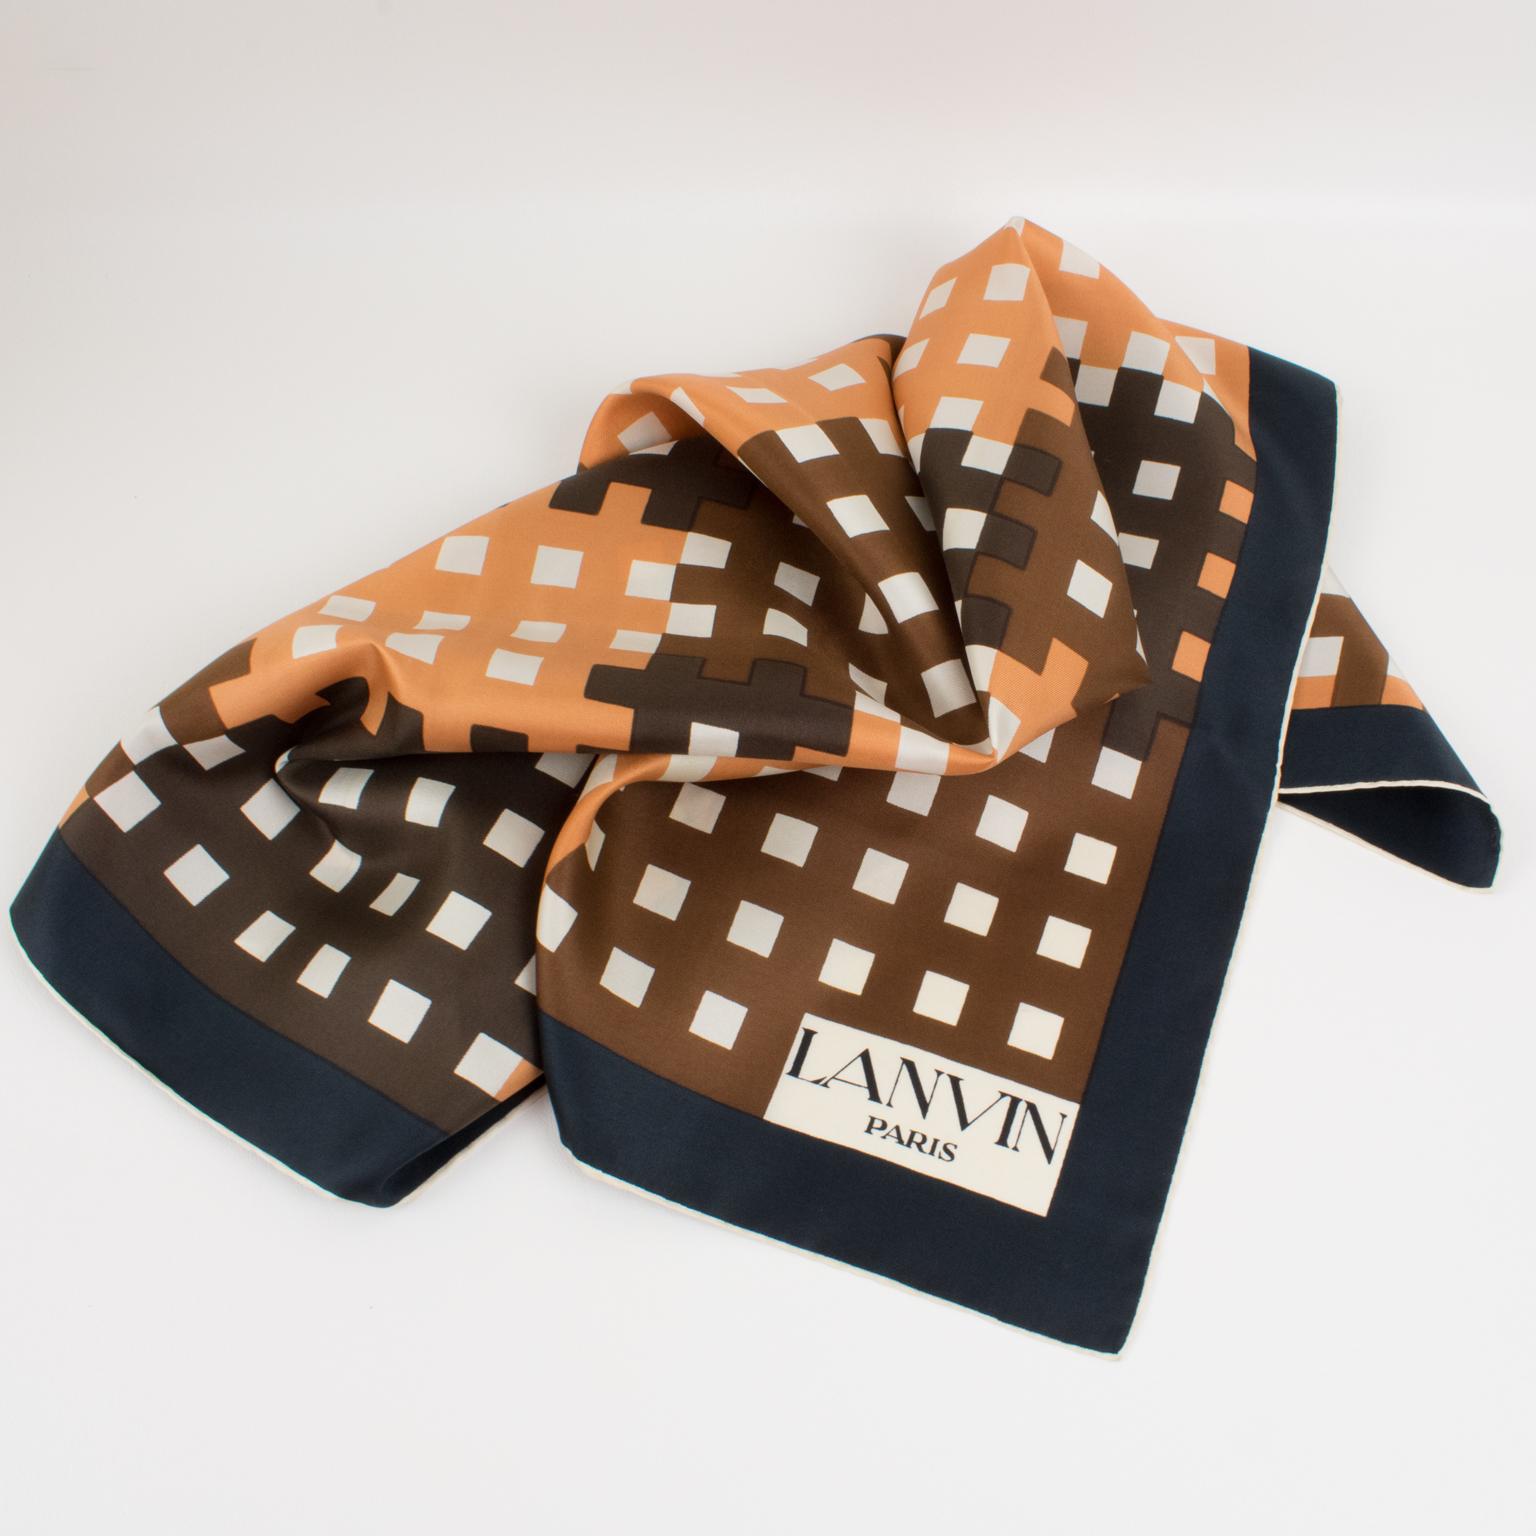 Lanvin Paris Silk Scarf 1970s Geometric Print in Camel and Brown Colors In Good Condition For Sale In Atlanta, GA